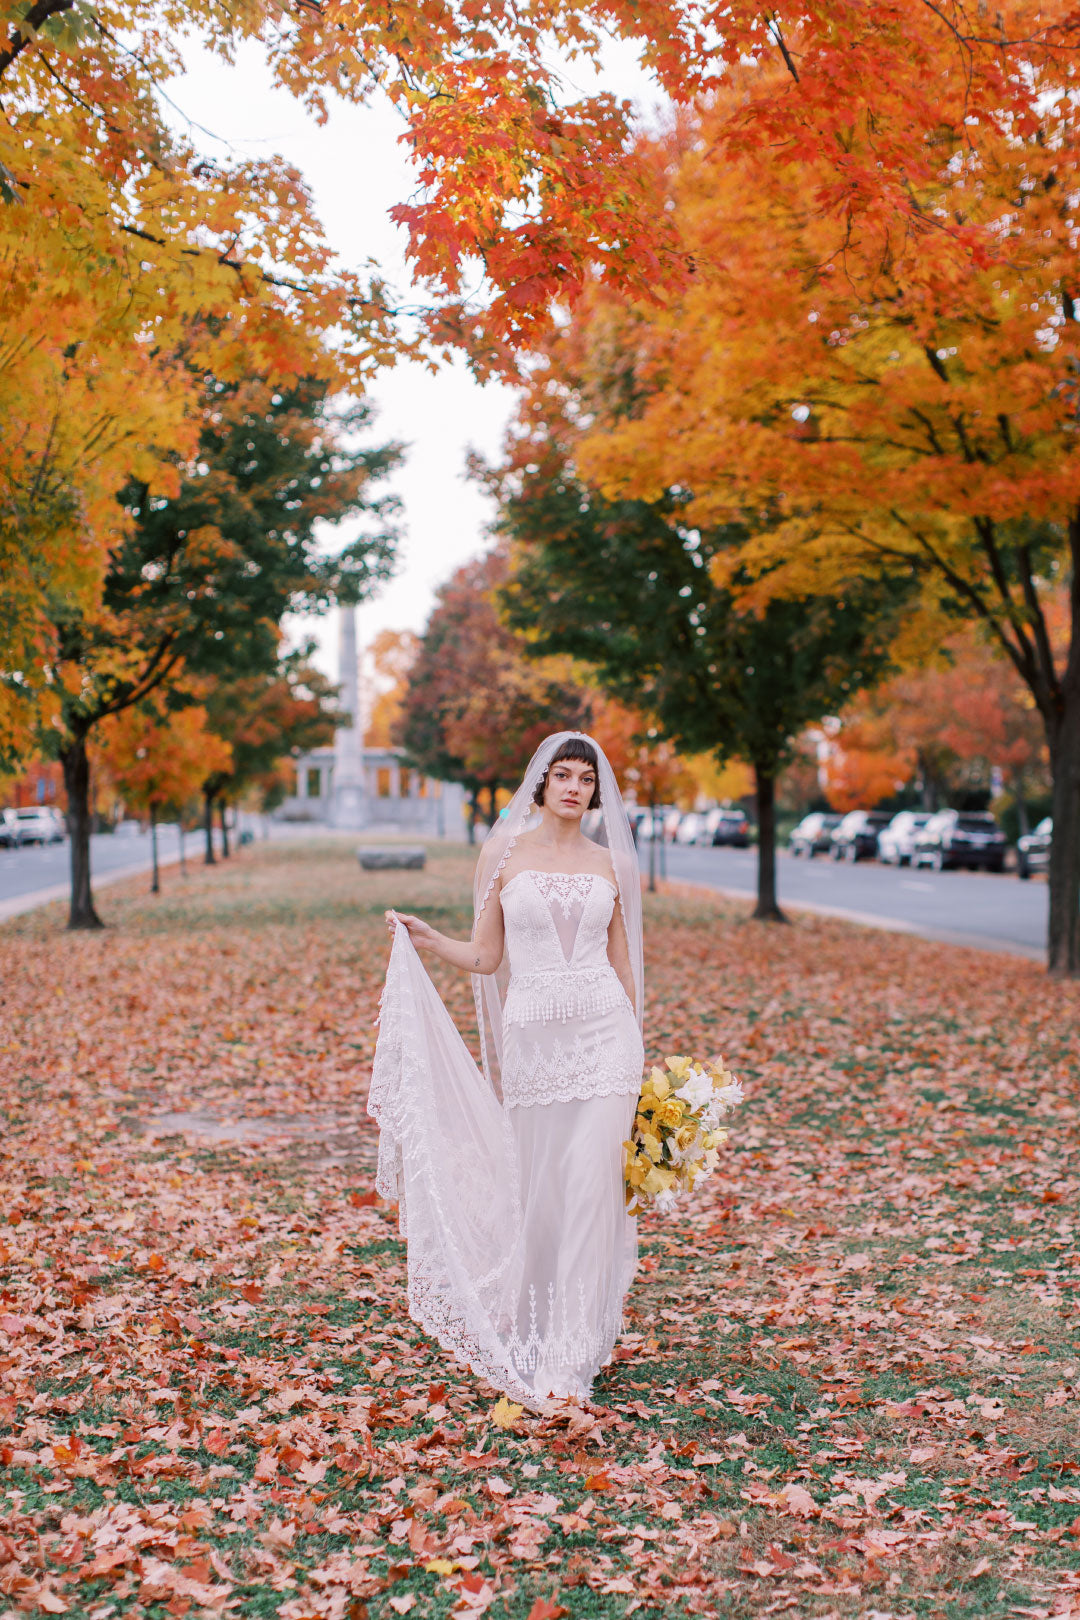 Victoriana Vintage Inspired Wedding Dress Bride walking with fall color leaves